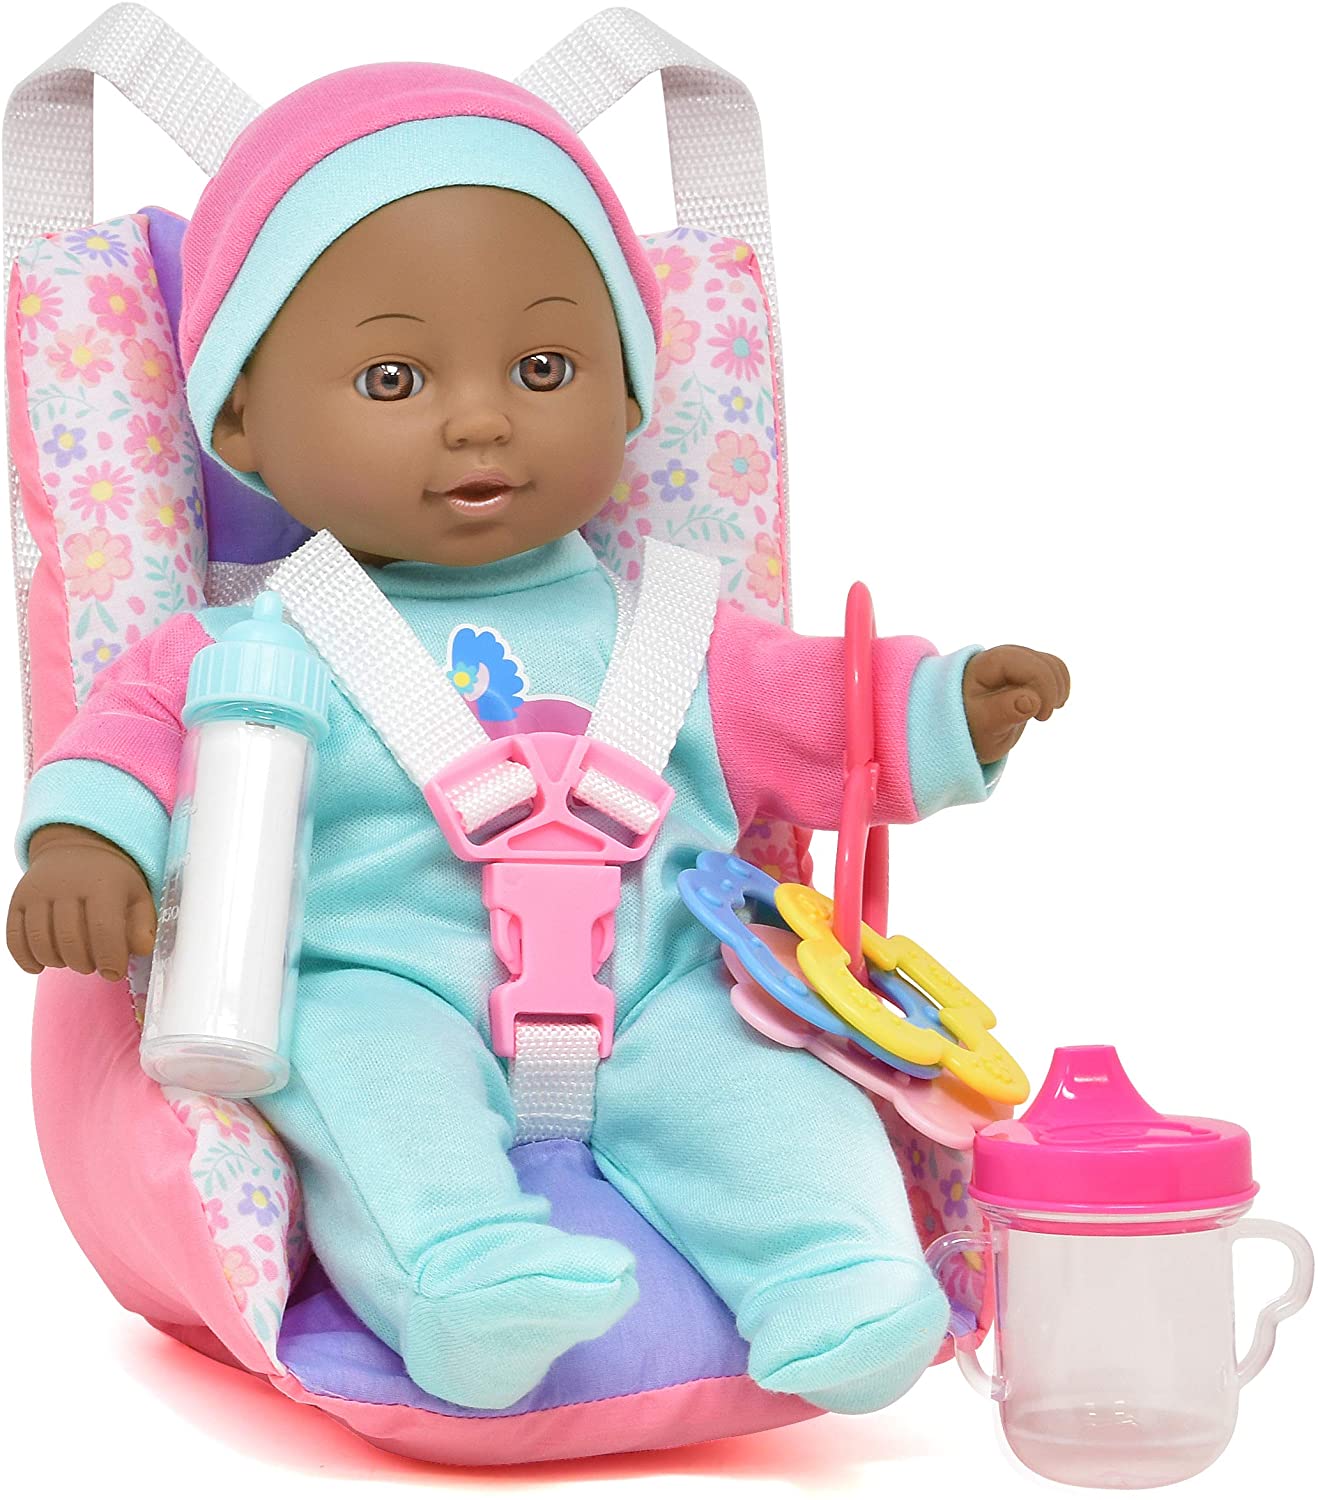 Dolls To Play Baby Doll Car Seat With Toy Accessories